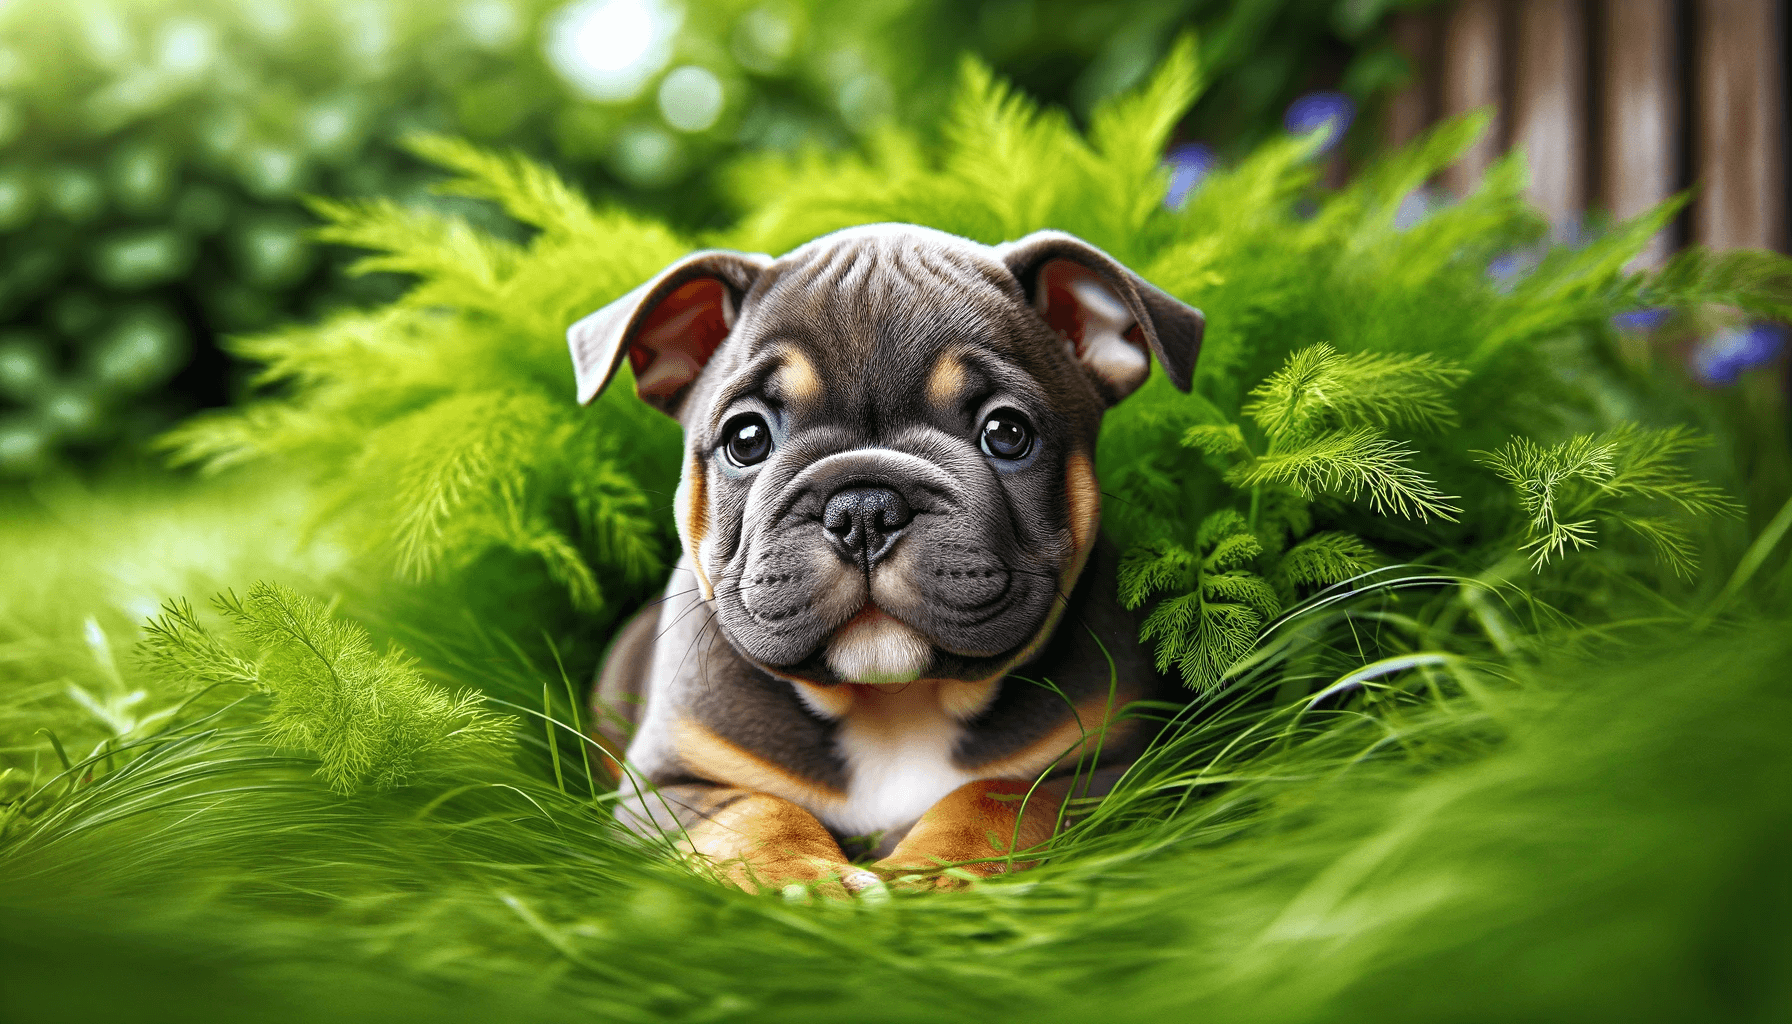 Exotic Bully puppy nestles in the grass, its stout and compact frame surrounded by vibrant greenery.